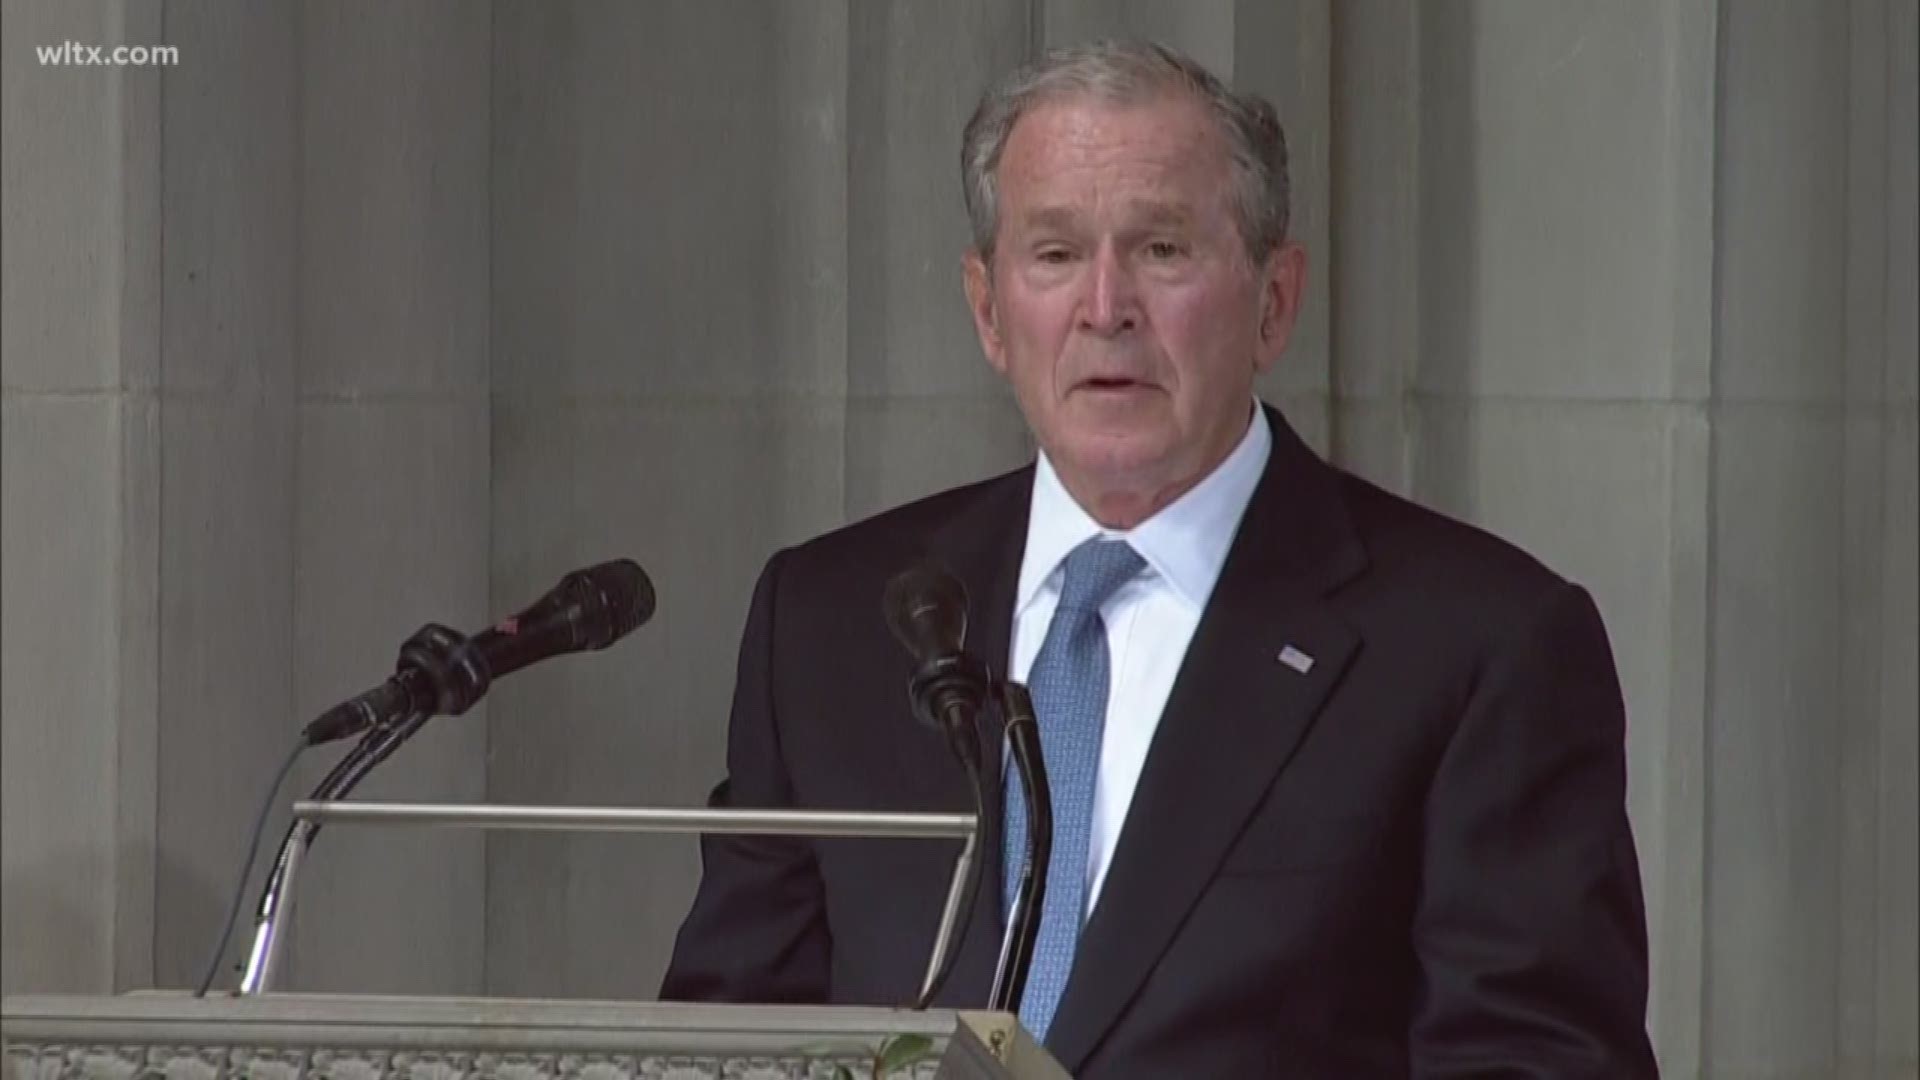 Former President George W. Bush spoke at the funeral of Sen. John McCain, his friend and one-time political rival.